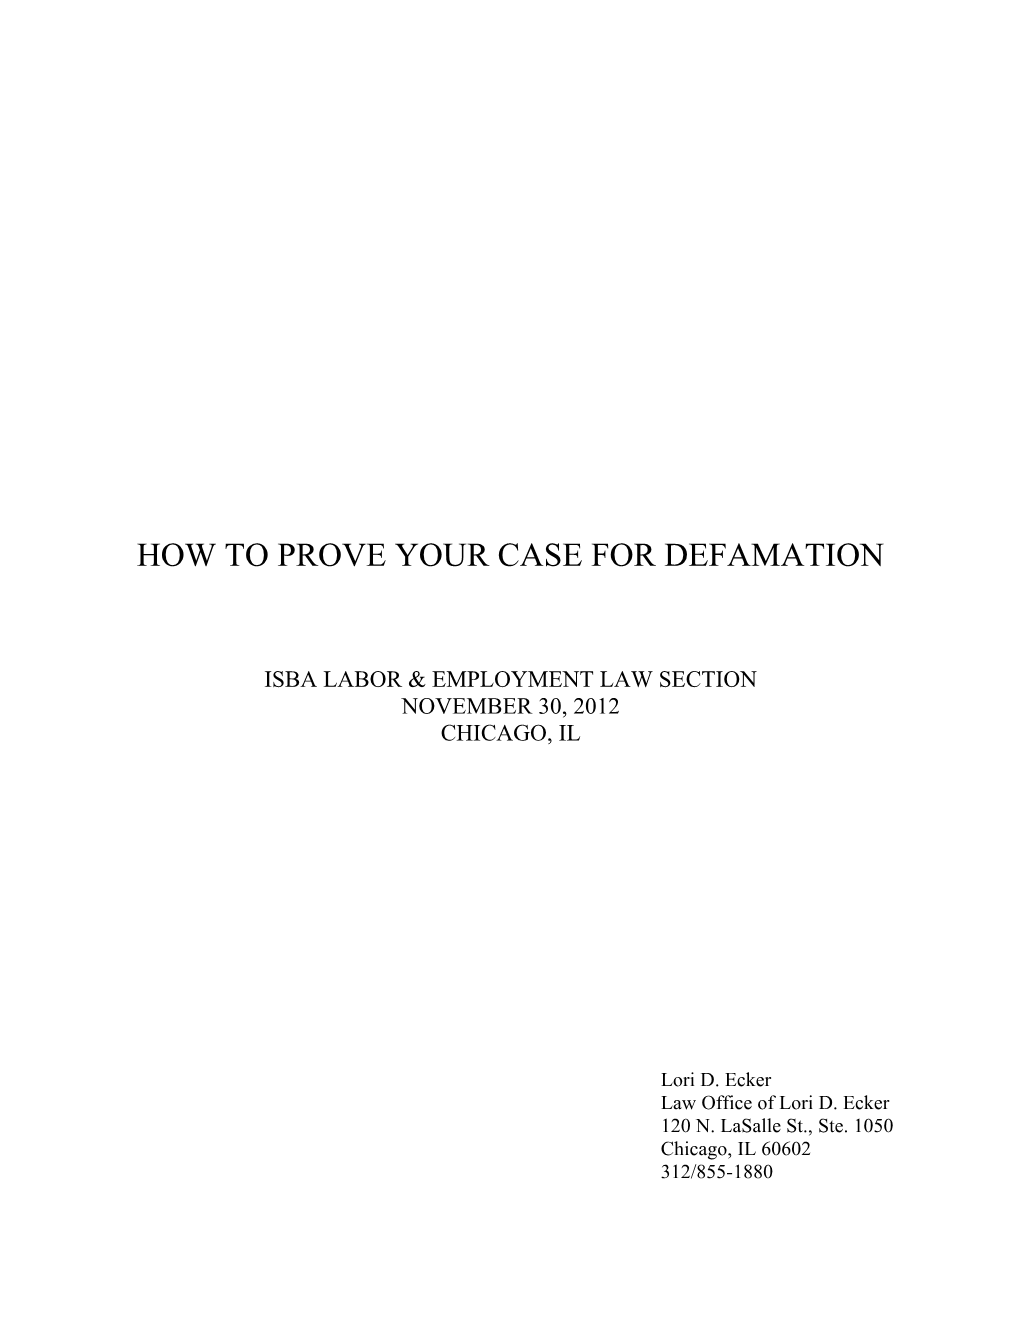 How to Prove Your Case for Defamation